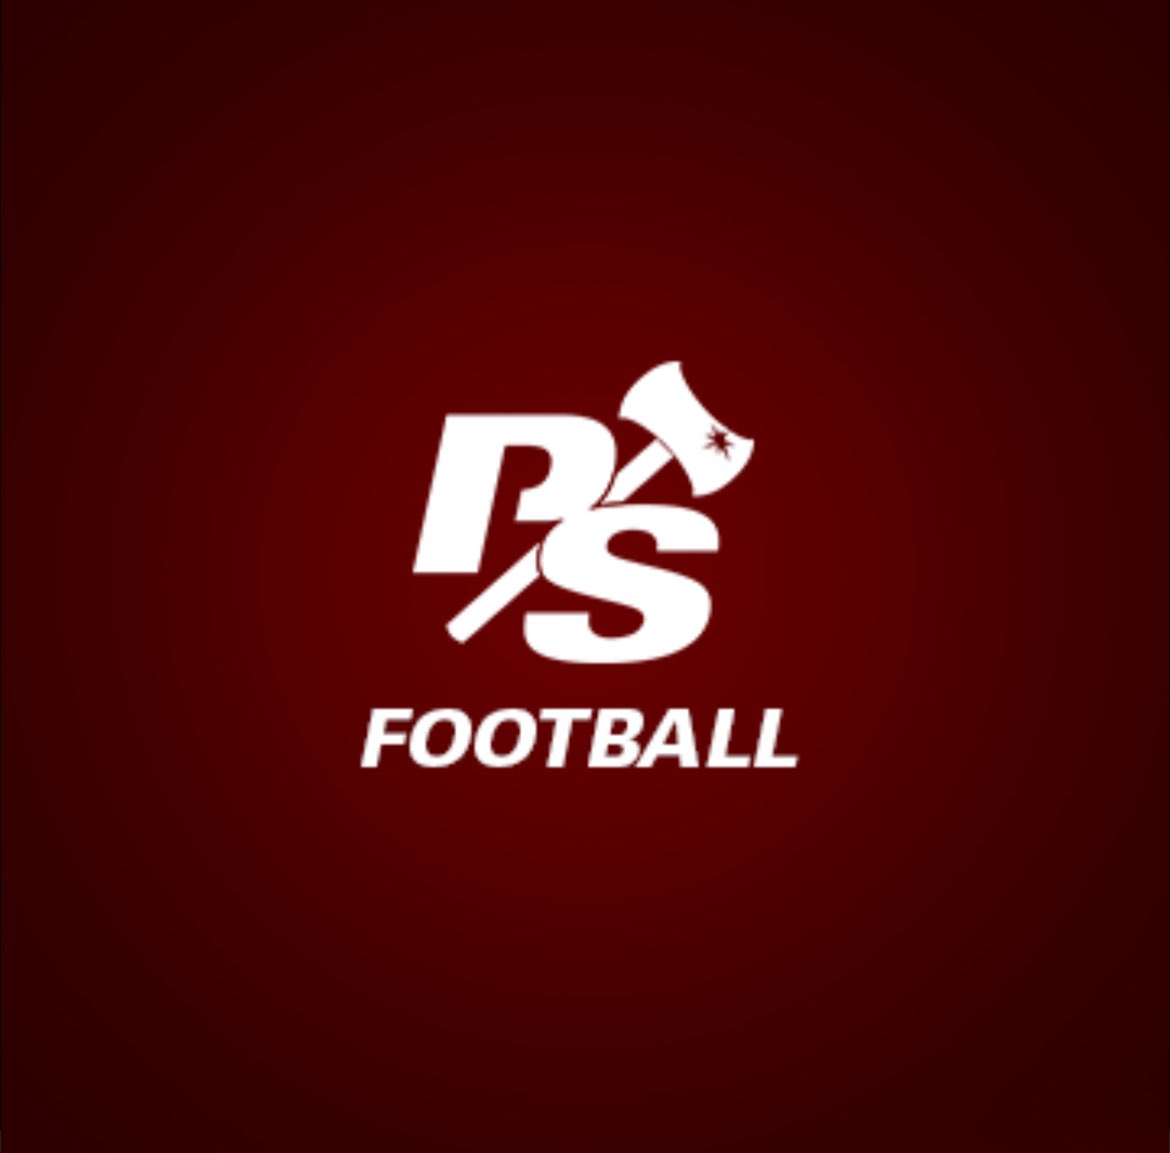 All Glory to God! Extremely blessed and grateful to receive my first D3 offer from The University of Pudget Sound! Thank you to @CoachCarskie for this opportunity.  @P_S_football @Jonesdr17 @bcanfield33 @CoachRHolland @CoachKravitz @AVHSFootball16 @jeffthomas4  #LoggerUp